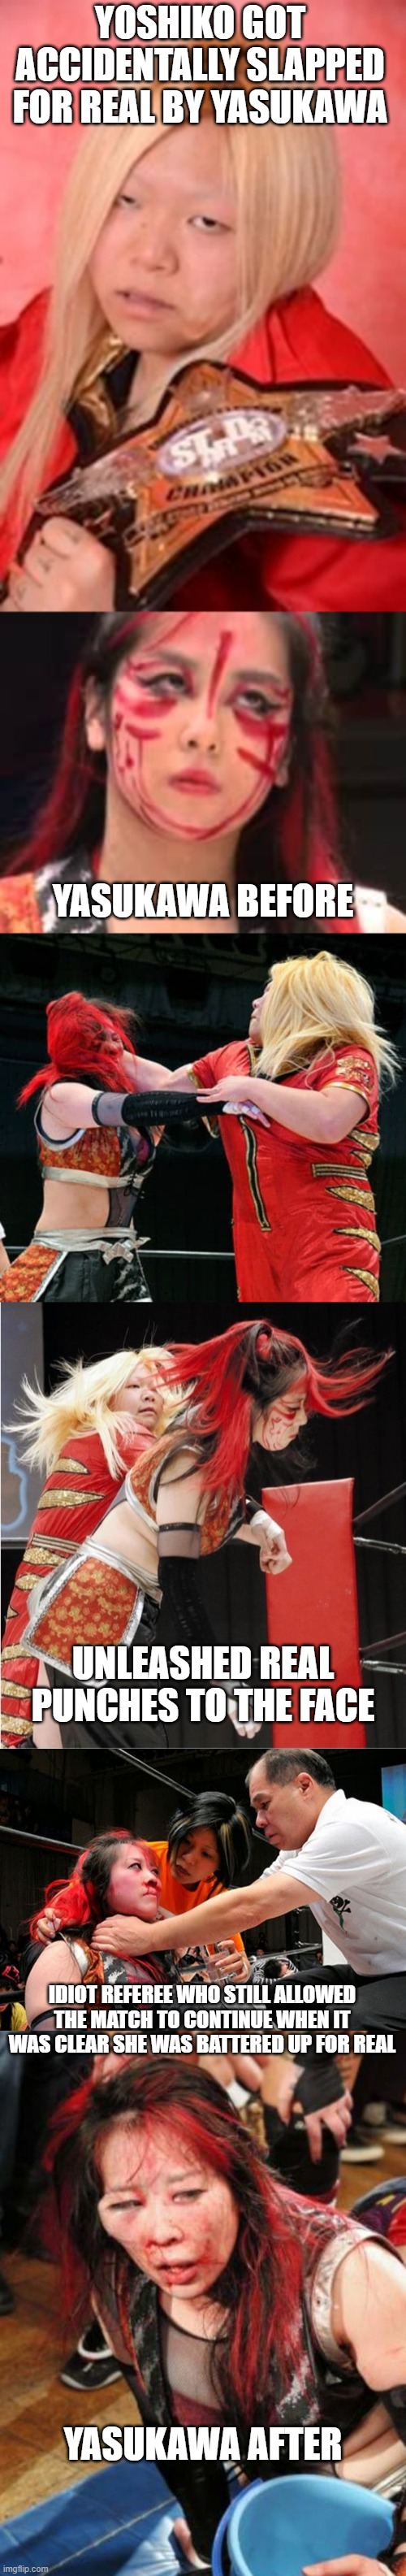 Predetermined Match gone wrong | YOSHIKO GOT ACCIDENTALLY SLAPPED FOR REAL BY YASUKAWA; YASUKAWA BEFORE; UNLEASHED REAL PUNCHES TO THE FACE; IDIOT REFEREE WHO STILL ALLOWED THE MATCH TO CONTINUE WHEN IT WAS CLEAR SHE WAS BATTERED UP FOR REAL; YASUKAWA AFTER | image tagged in yasukawa,yoshiko,wrestling,wwe | made w/ Imgflip meme maker